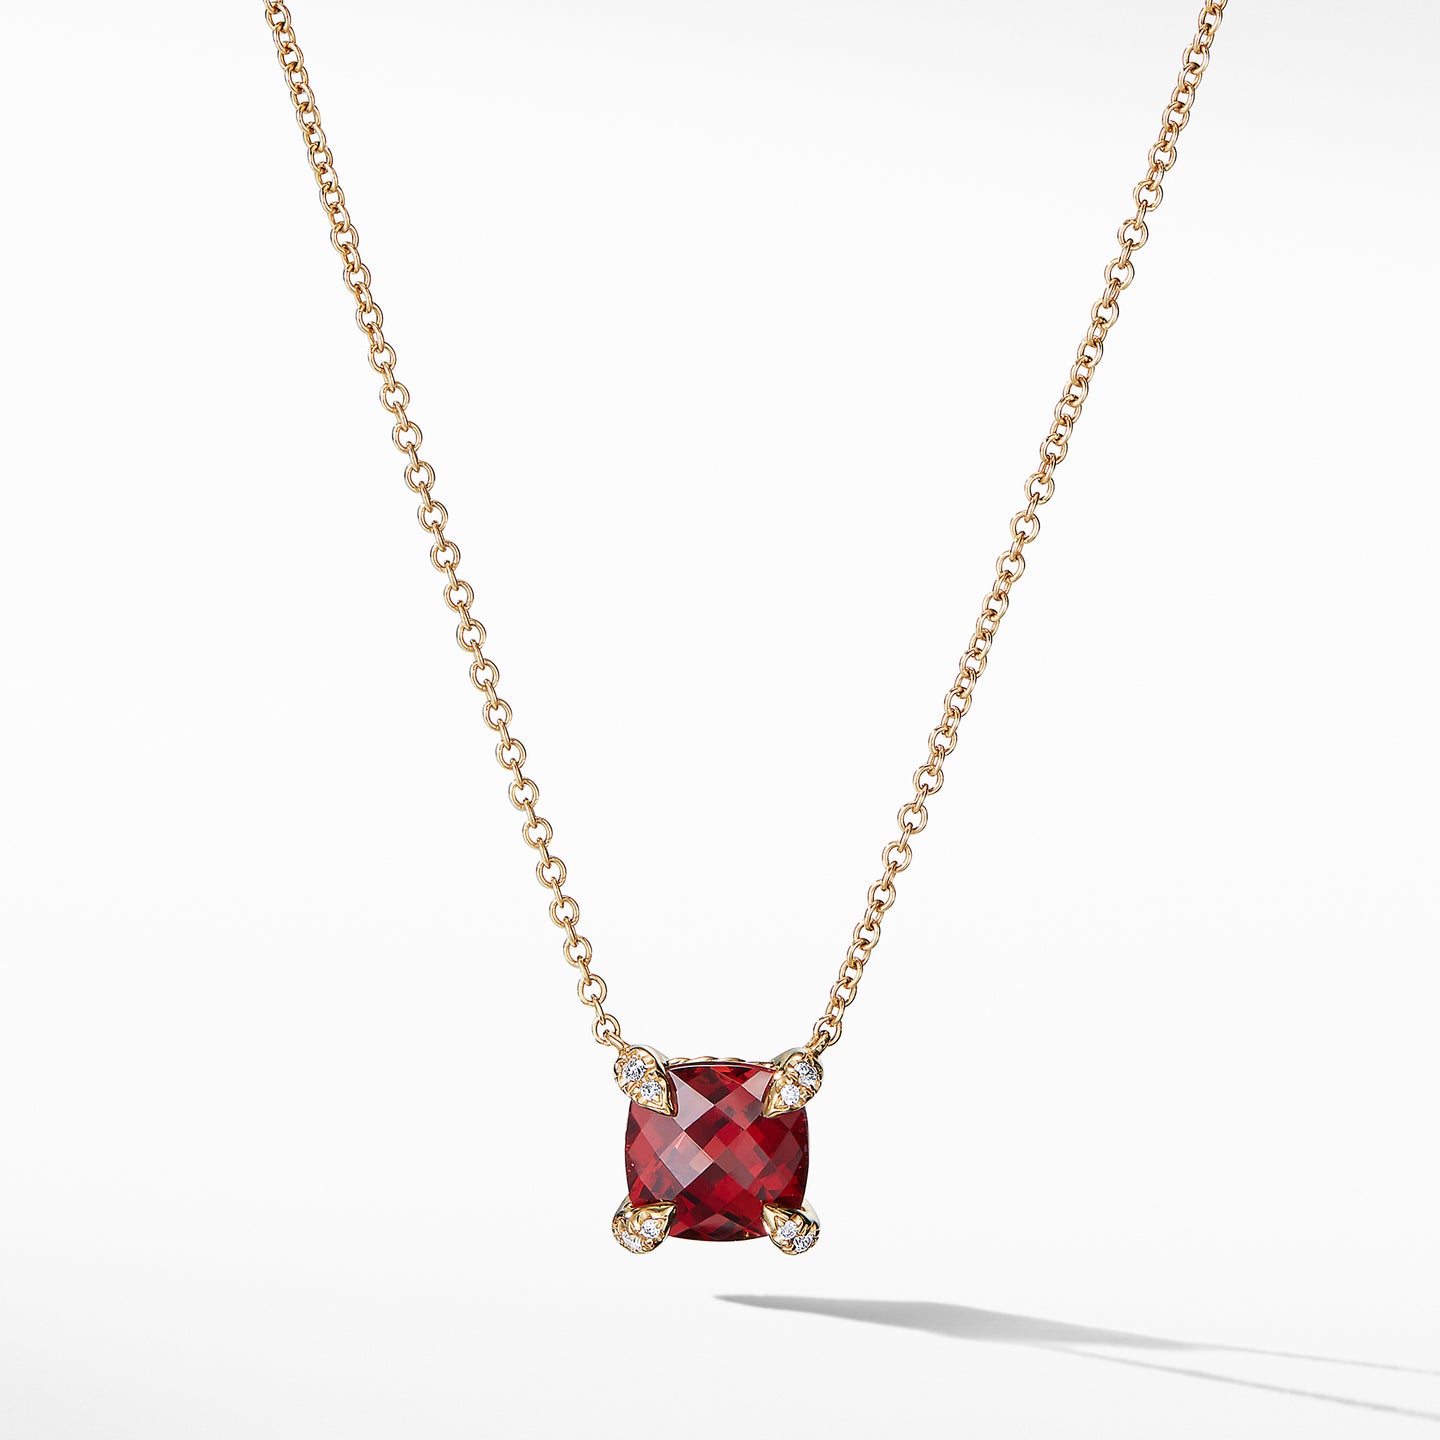 Pendant Necklace with Garnet and Diamonds in 18K Gold, 18